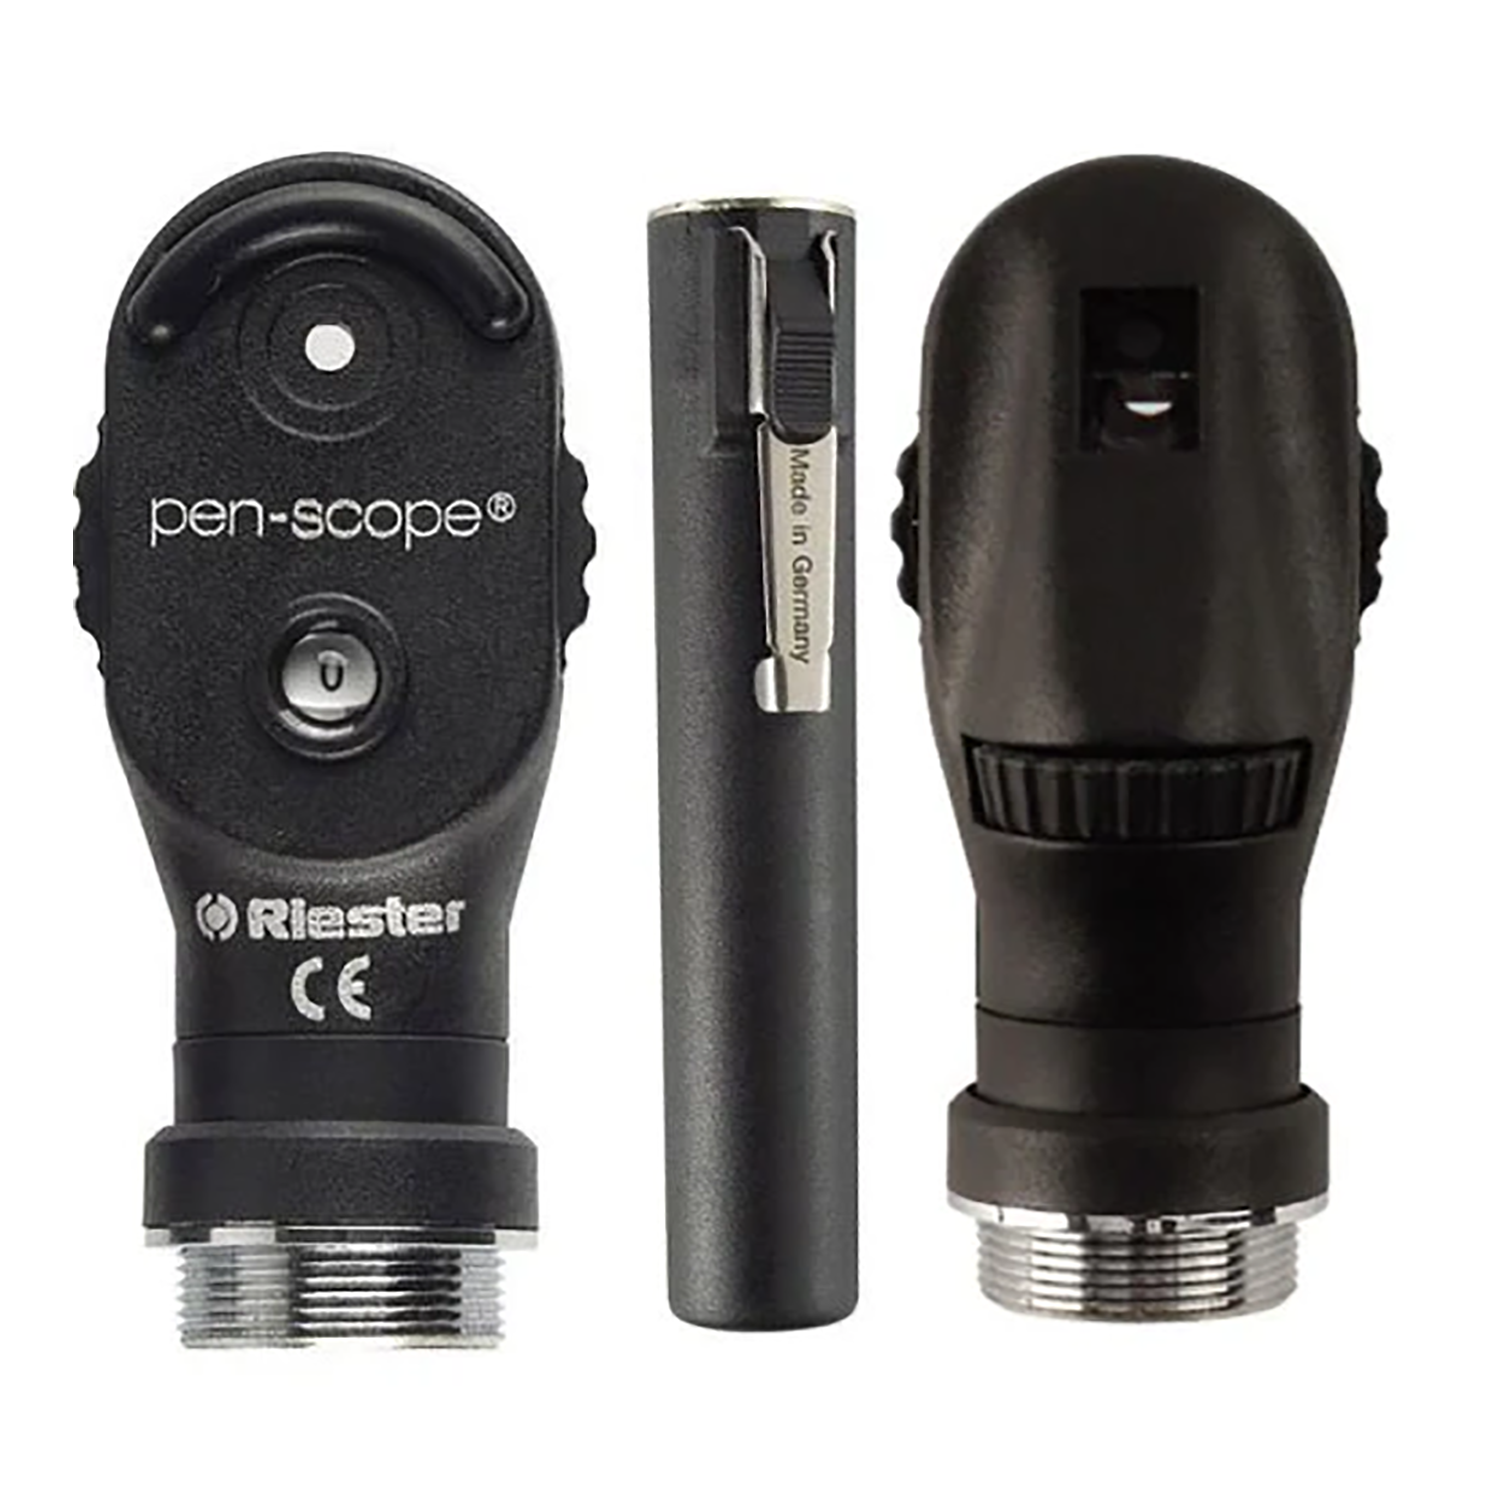 Riester Penscope Ophthalmoscope | 2.5V | Black (2)